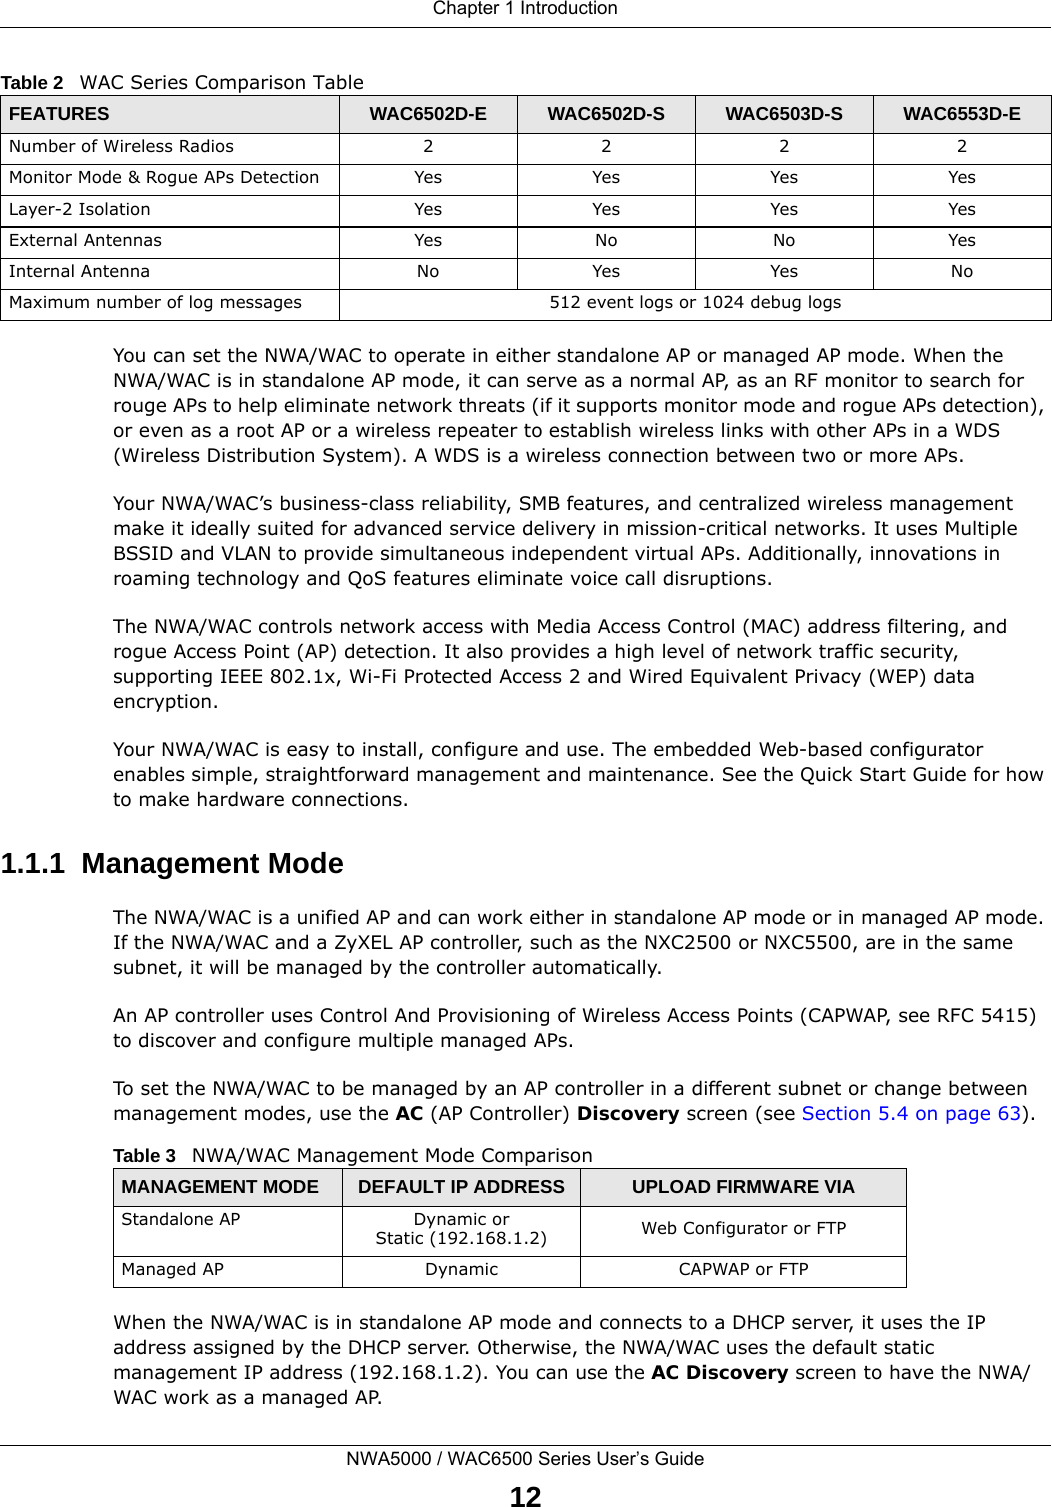 Chapter 1 IntroductionNWA5000 / WAC6500 Series User’s Guide12You can set the NWA/WAC to operate in either standalone AP or managed AP mode. When the NWA/WAC is in standalone AP mode, it can serve as a normal AP, as an RF monitor to search for rouge APs to help eliminate network threats (if it supports monitor mode and rogue APs detection), or even as a root AP or a wireless repeater to establish wireless links with other APs in a WDS (Wireless Distribution System). A WDS is a wireless connection between two or more APs.Your NWA/WAC’s business-class reliability, SMB features, and centralized wireless management make it ideally suited for advanced service delivery in mission-critical networks. It uses Multiple BSSID and VLAN to provide simultaneous independent virtual APs. Additionally, innovations in roaming technology and QoS features eliminate voice call disruptions. The NWA/WAC controls network access with Media Access Control (MAC) address filtering, and rogue Access Point (AP) detection. It also provides a high level of network traffic security, supporting IEEE 802.1x, Wi-Fi Protected Access 2 and Wired Equivalent Privacy (WEP) data encryption.Your NWA/WAC is easy to install, configure and use. The embedded Web-based configurator enables simple, straightforward management and maintenance. See the Quick Start Guide for how to make hardware connections.1.1.1  Management Mode The NWA/WAC is a unified AP and can work either in standalone AP mode or in managed AP mode. If the NWA/WAC and a ZyXEL AP controller, such as the NXC2500 or NXC5500, are in the same subnet, it will be managed by the controller automatically.An AP controller uses Control And Provisioning of Wireless Access Points (CAPWAP, see RFC 5415) to discover and configure multiple managed APs.To set the NWA/WAC to be managed by an AP controller in a different subnet or change between management modes, use the AC (AP Controller) Discovery screen (see Section 5.4 on page 63). When the NWA/WAC is in standalone AP mode and connects to a DHCP server, it uses the IP address assigned by the DHCP server. Otherwise, the NWA/WAC uses the default static management IP address (192.168.1.2). You can use the AC Discovery screen to have the NWA/WAC work as a managed AP.Number of Wireless Radios 2 2 2 2Monitor Mode &amp; Rogue APs Detection Yes Yes Yes YesLayer-2 Isolation Yes Yes Yes YesExternal Antennas Yes No No YesInternal Antenna No Yes Yes NoMaximum number of log messages  512 event logs or 1024 debug logsTable 2   WAC Series Comparison TableFEATURES WAC6502D-E WAC6502D-S WAC6503D-S WAC6553D-ETable 3   NWA/WAC Management Mode ComparisonMANAGEMENT MODE DEFAULT IP ADDRESS UPLOAD FIRMWARE VIAStandalone APDynamic orStatic (192.168.1.2) Web Configurator or FTPManaged AP Dynamic CAPWAP or FTP